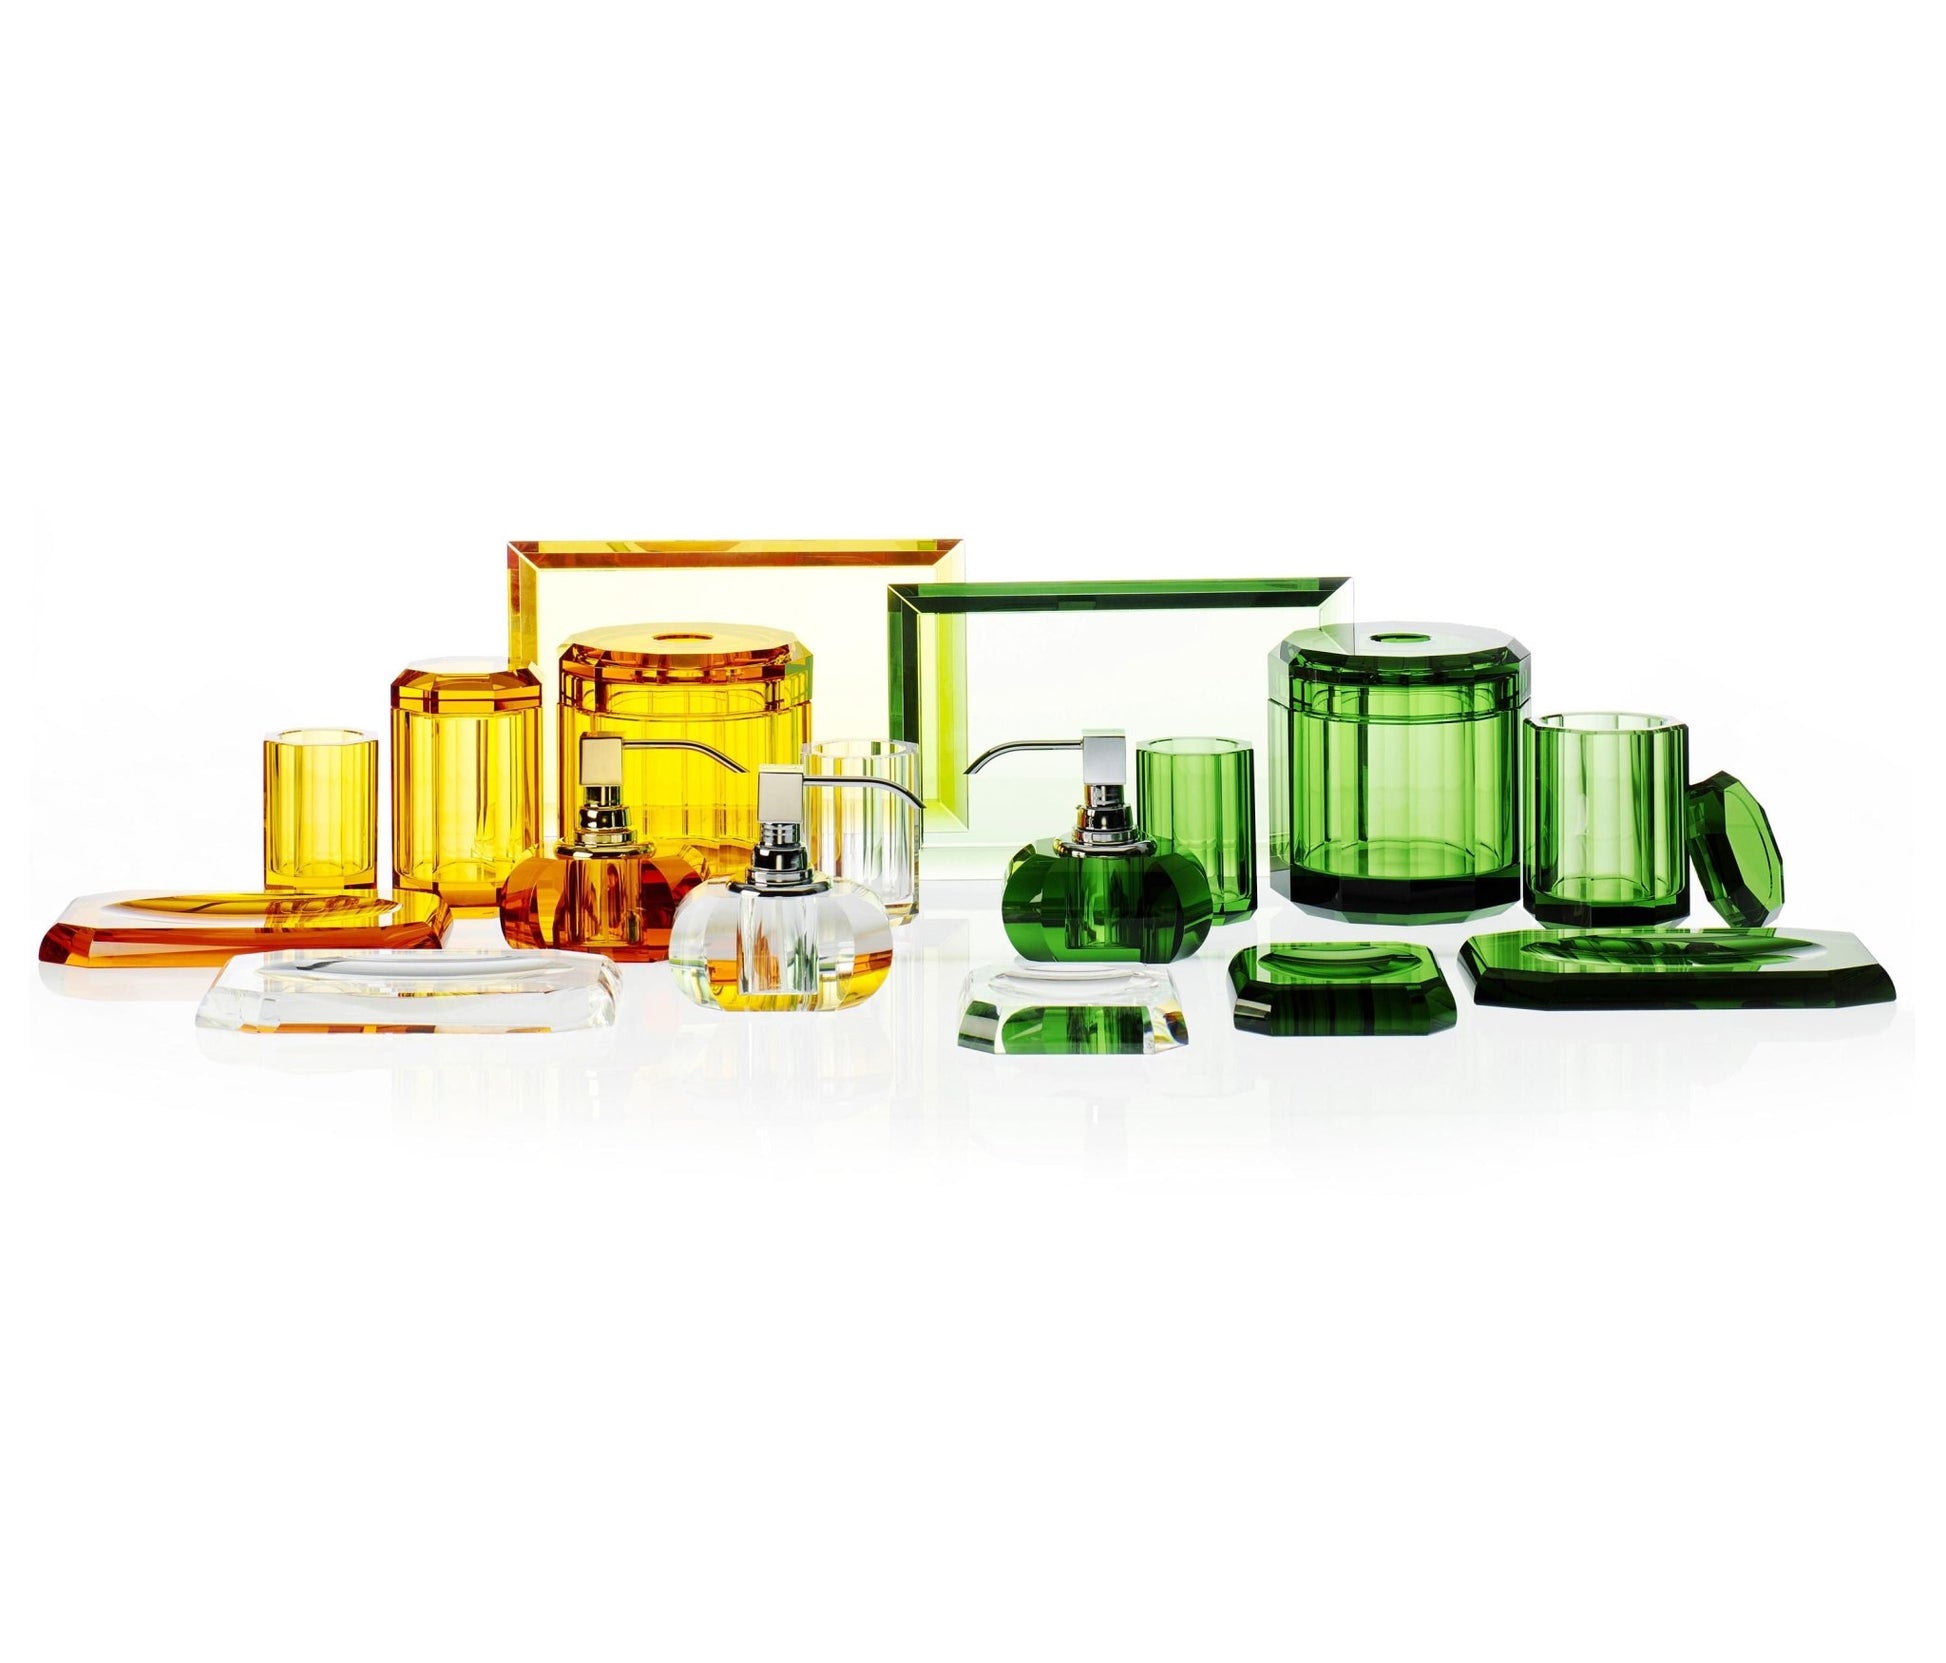 Rectangular Crystal Glass Tray in English Green by Decor Walther - |VESIMI Design| Luxury Bathrooms & Deco